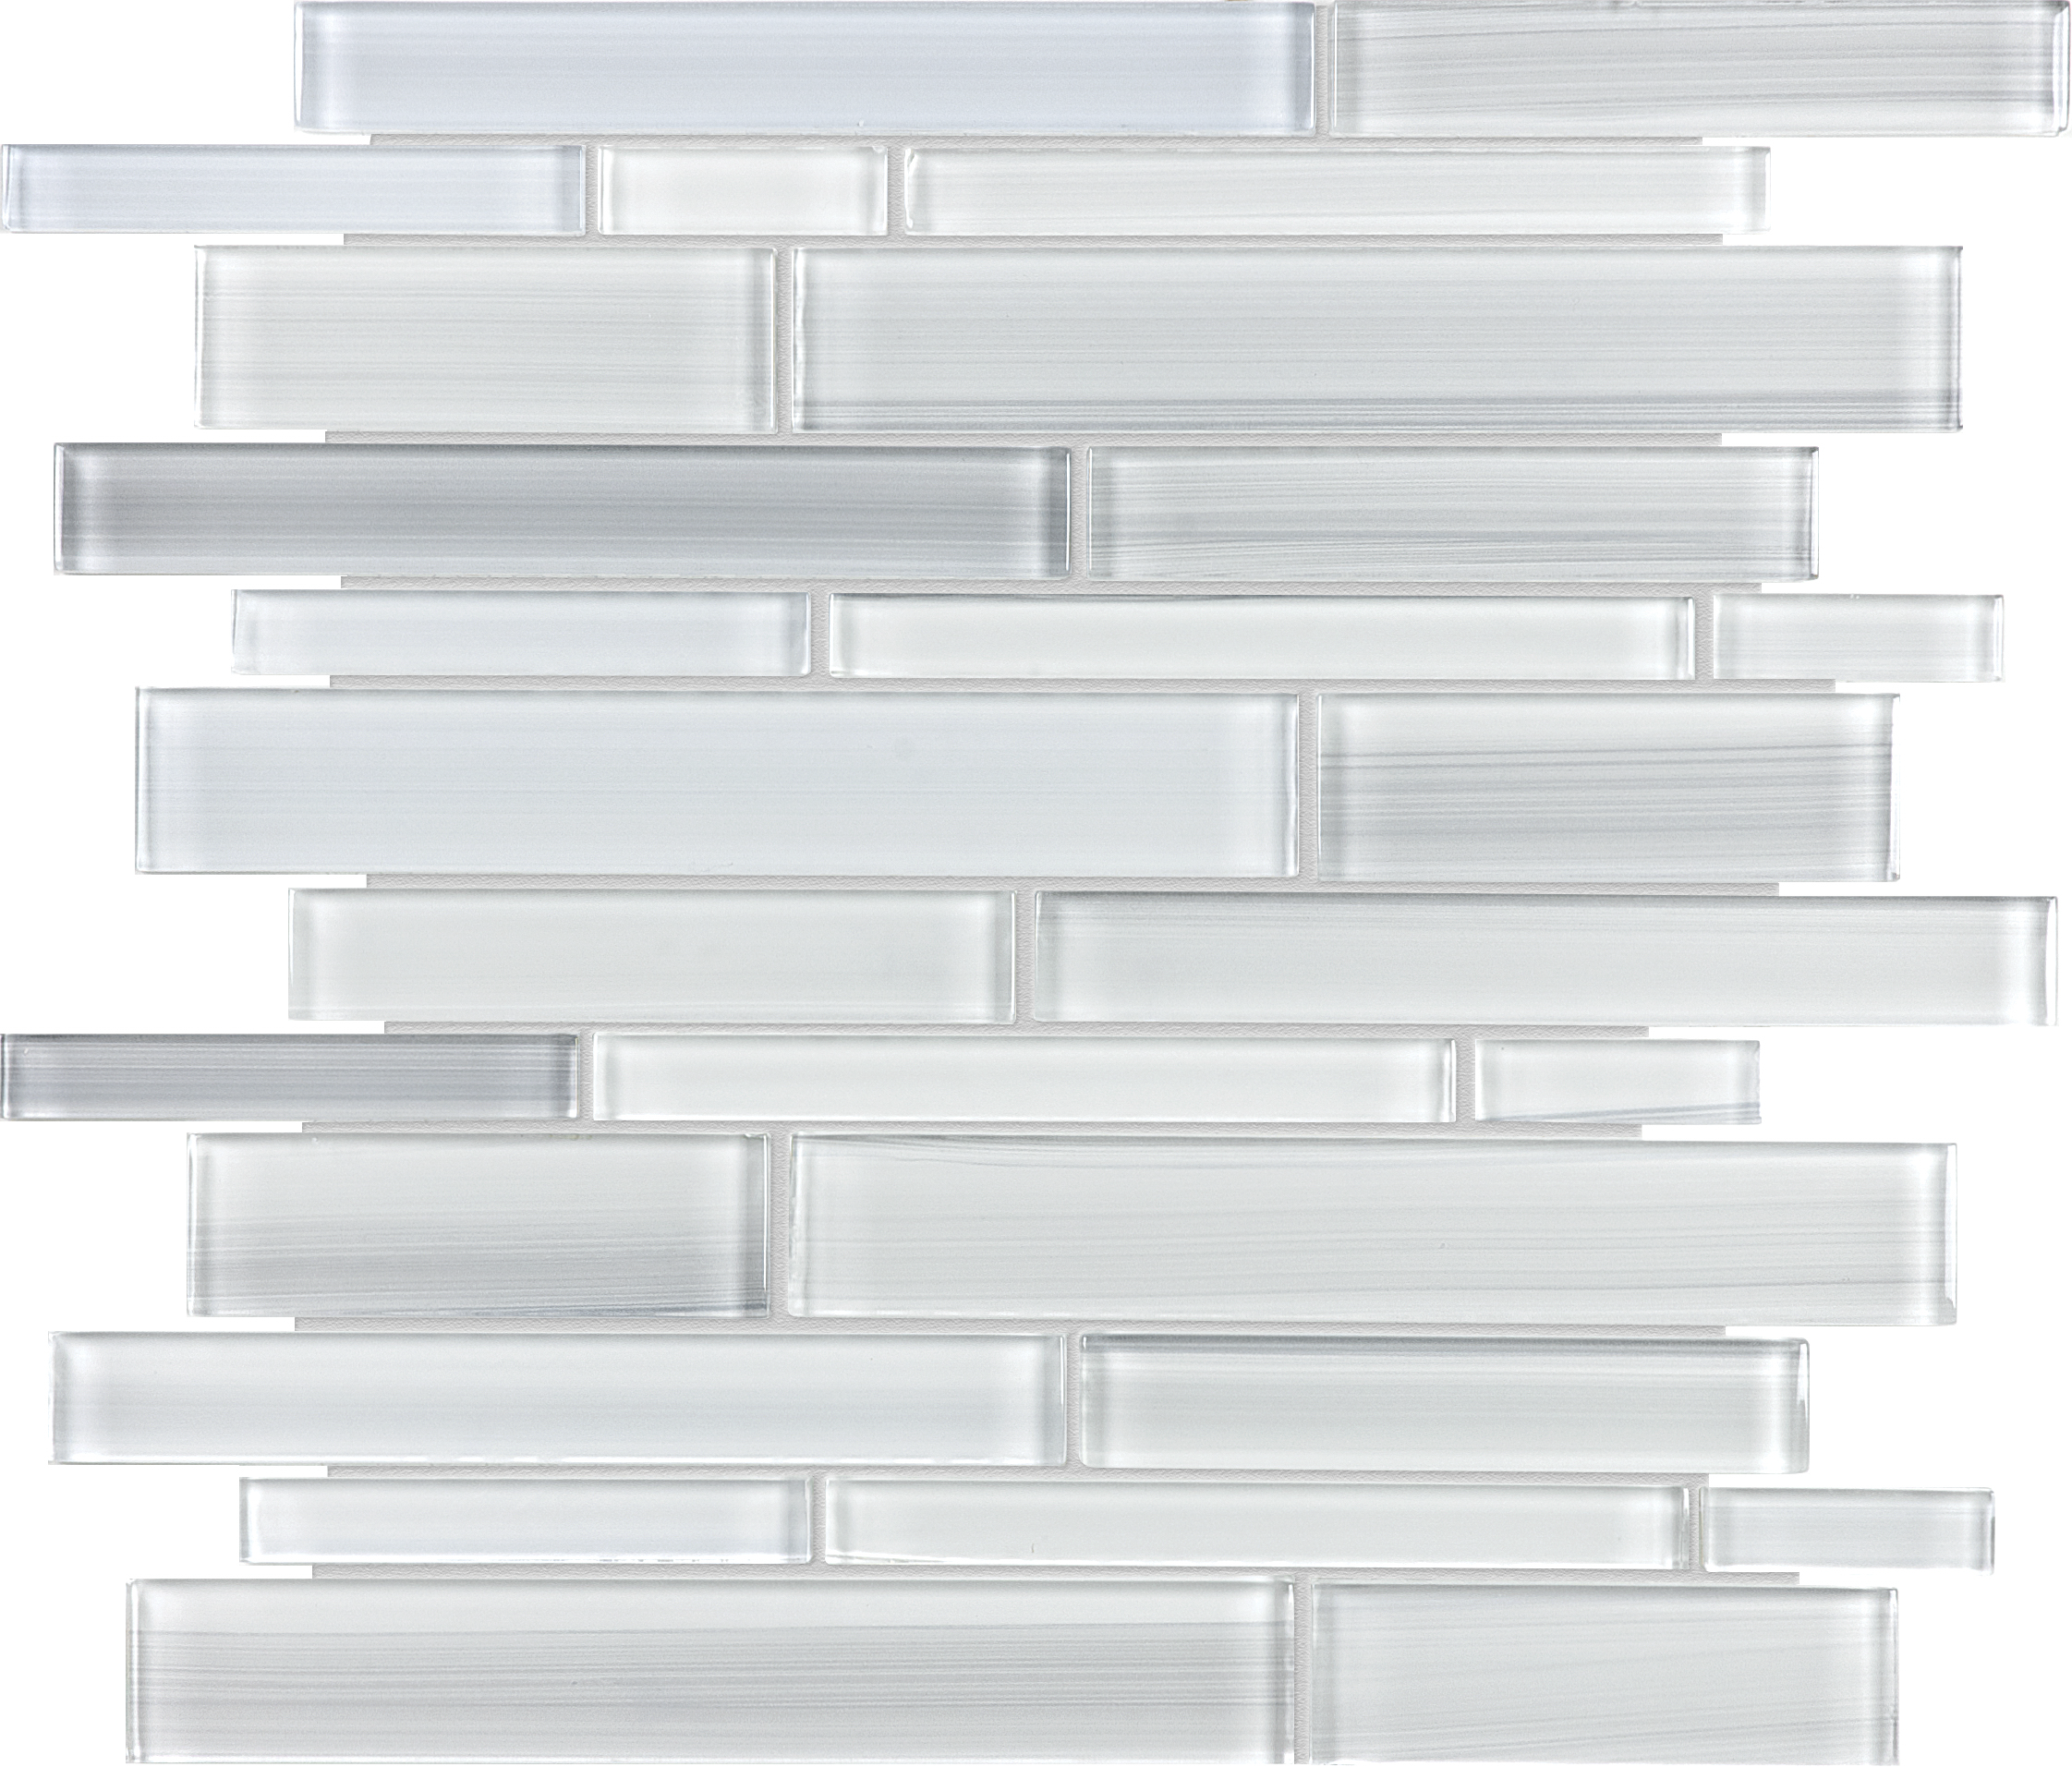 ice random strip pattern fused glass mosaic from fusion anatolia collection distributed by surface group international glossy finish rounded edge mesh shape